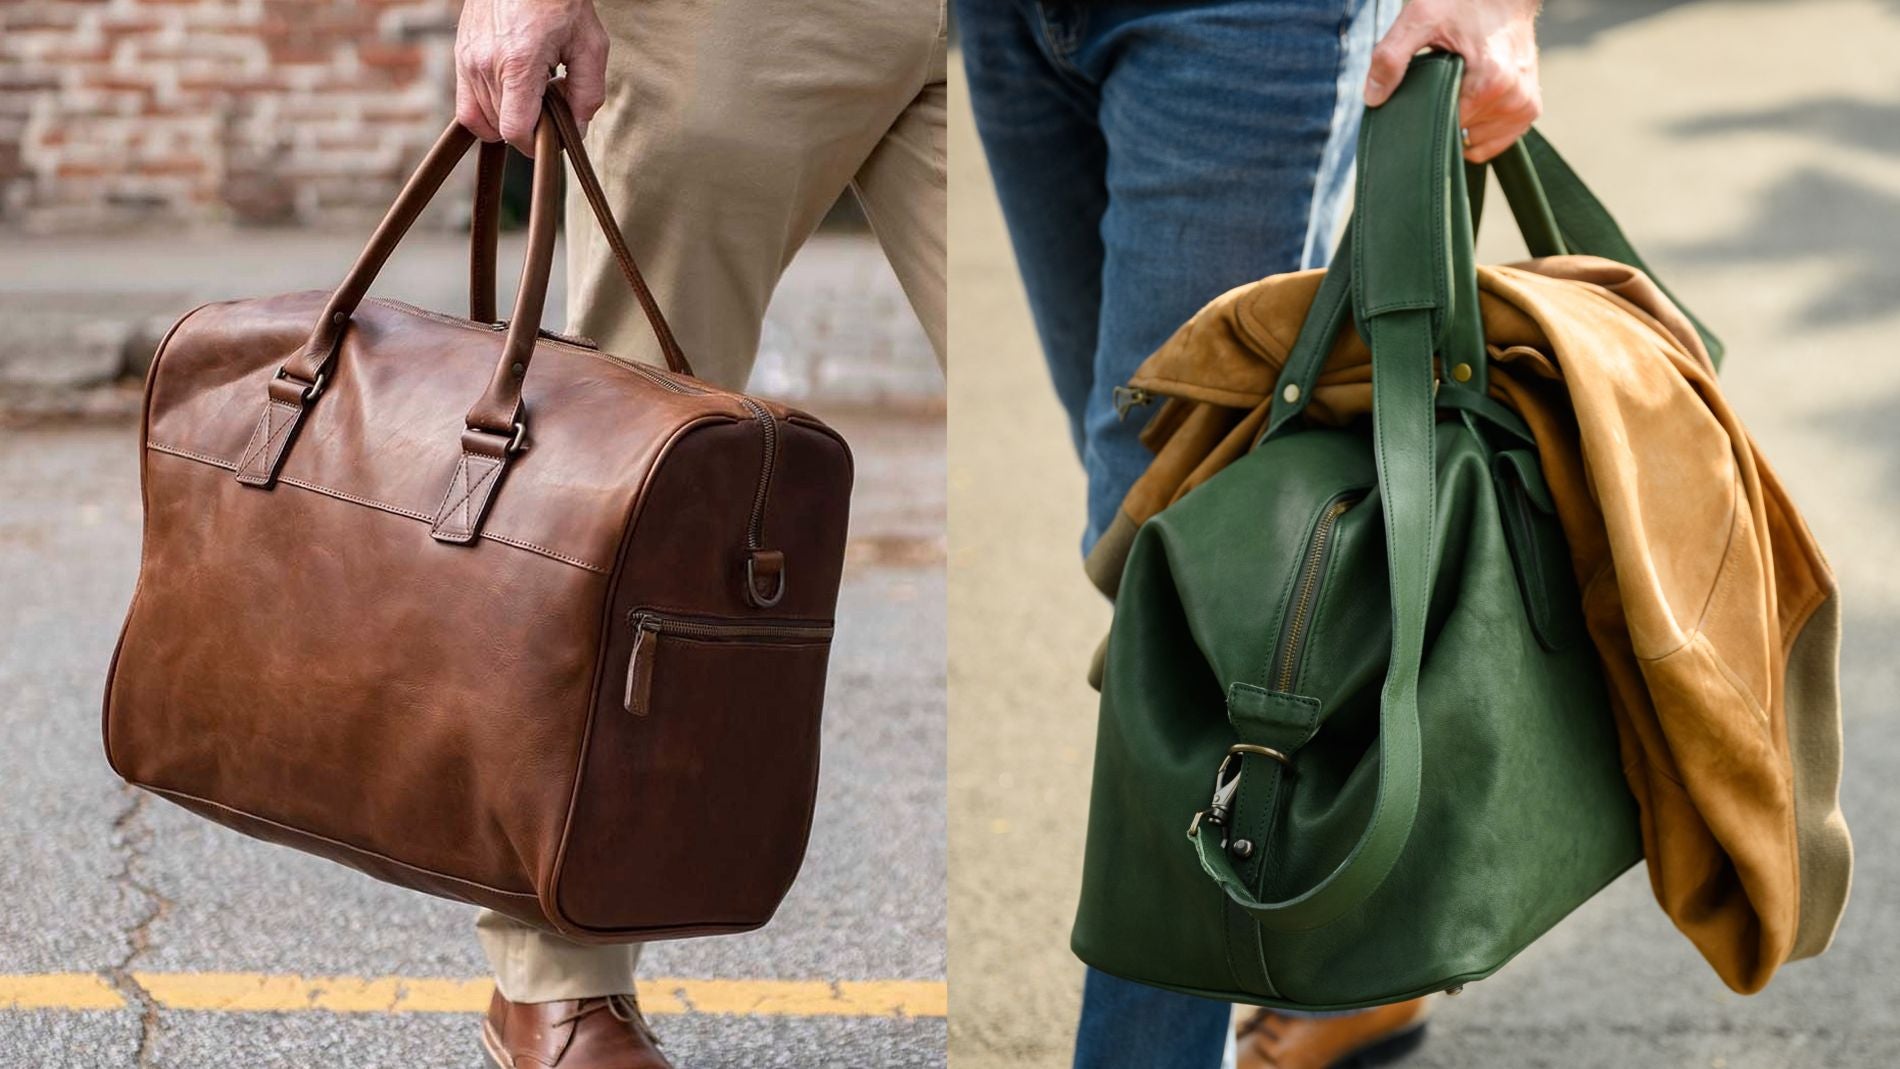 Moore & Giles Leather Bags, Accessories, and Home Goods